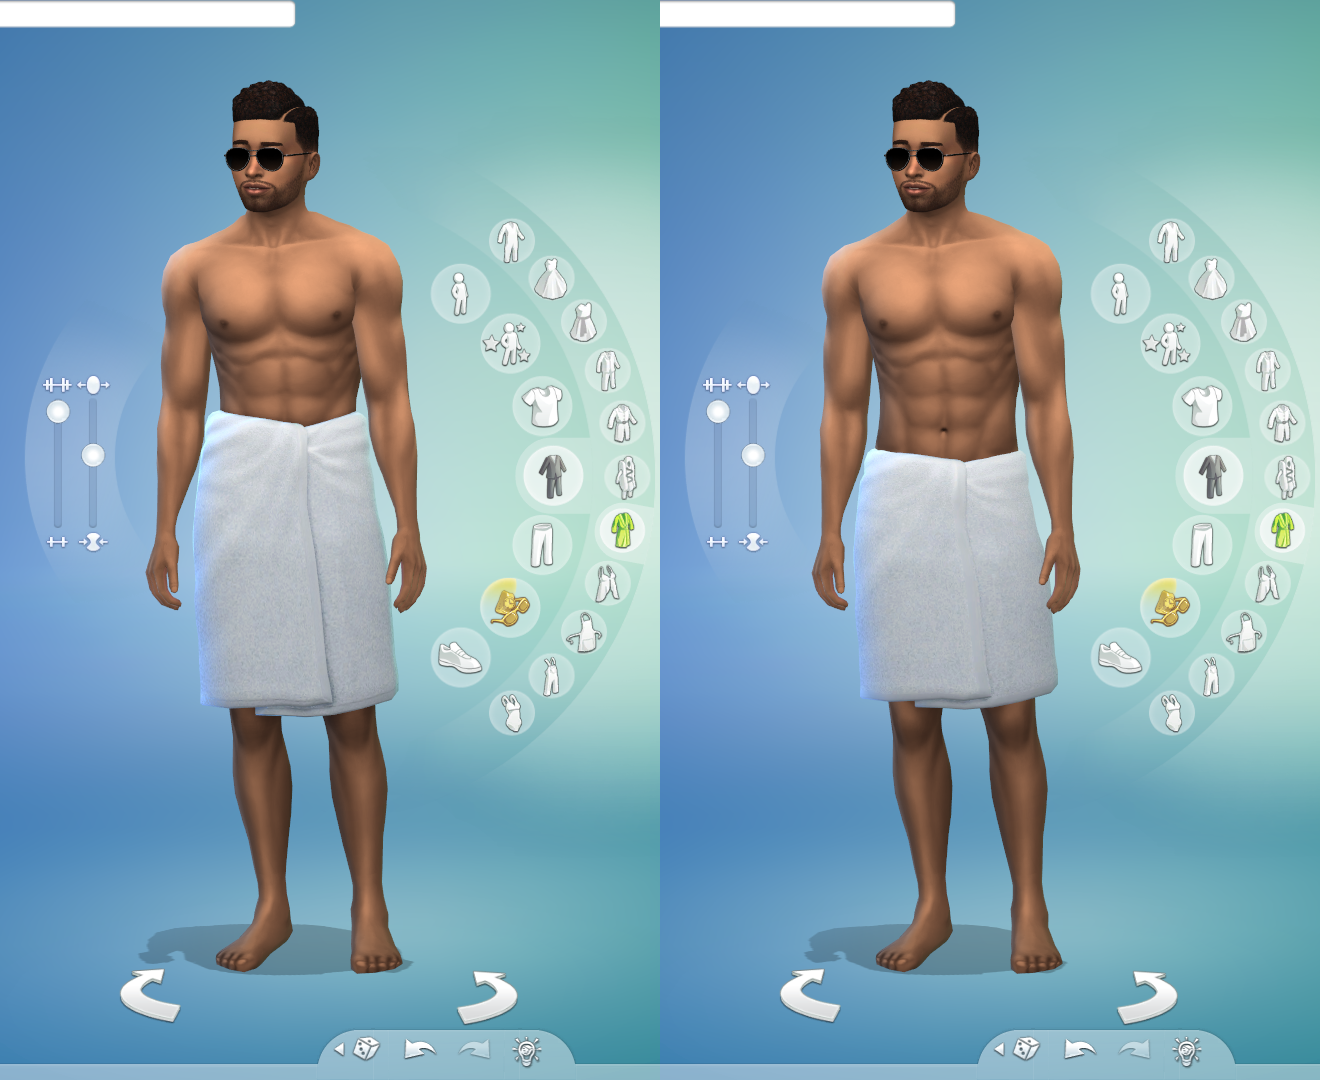 Mod The Sims Lowered Towel